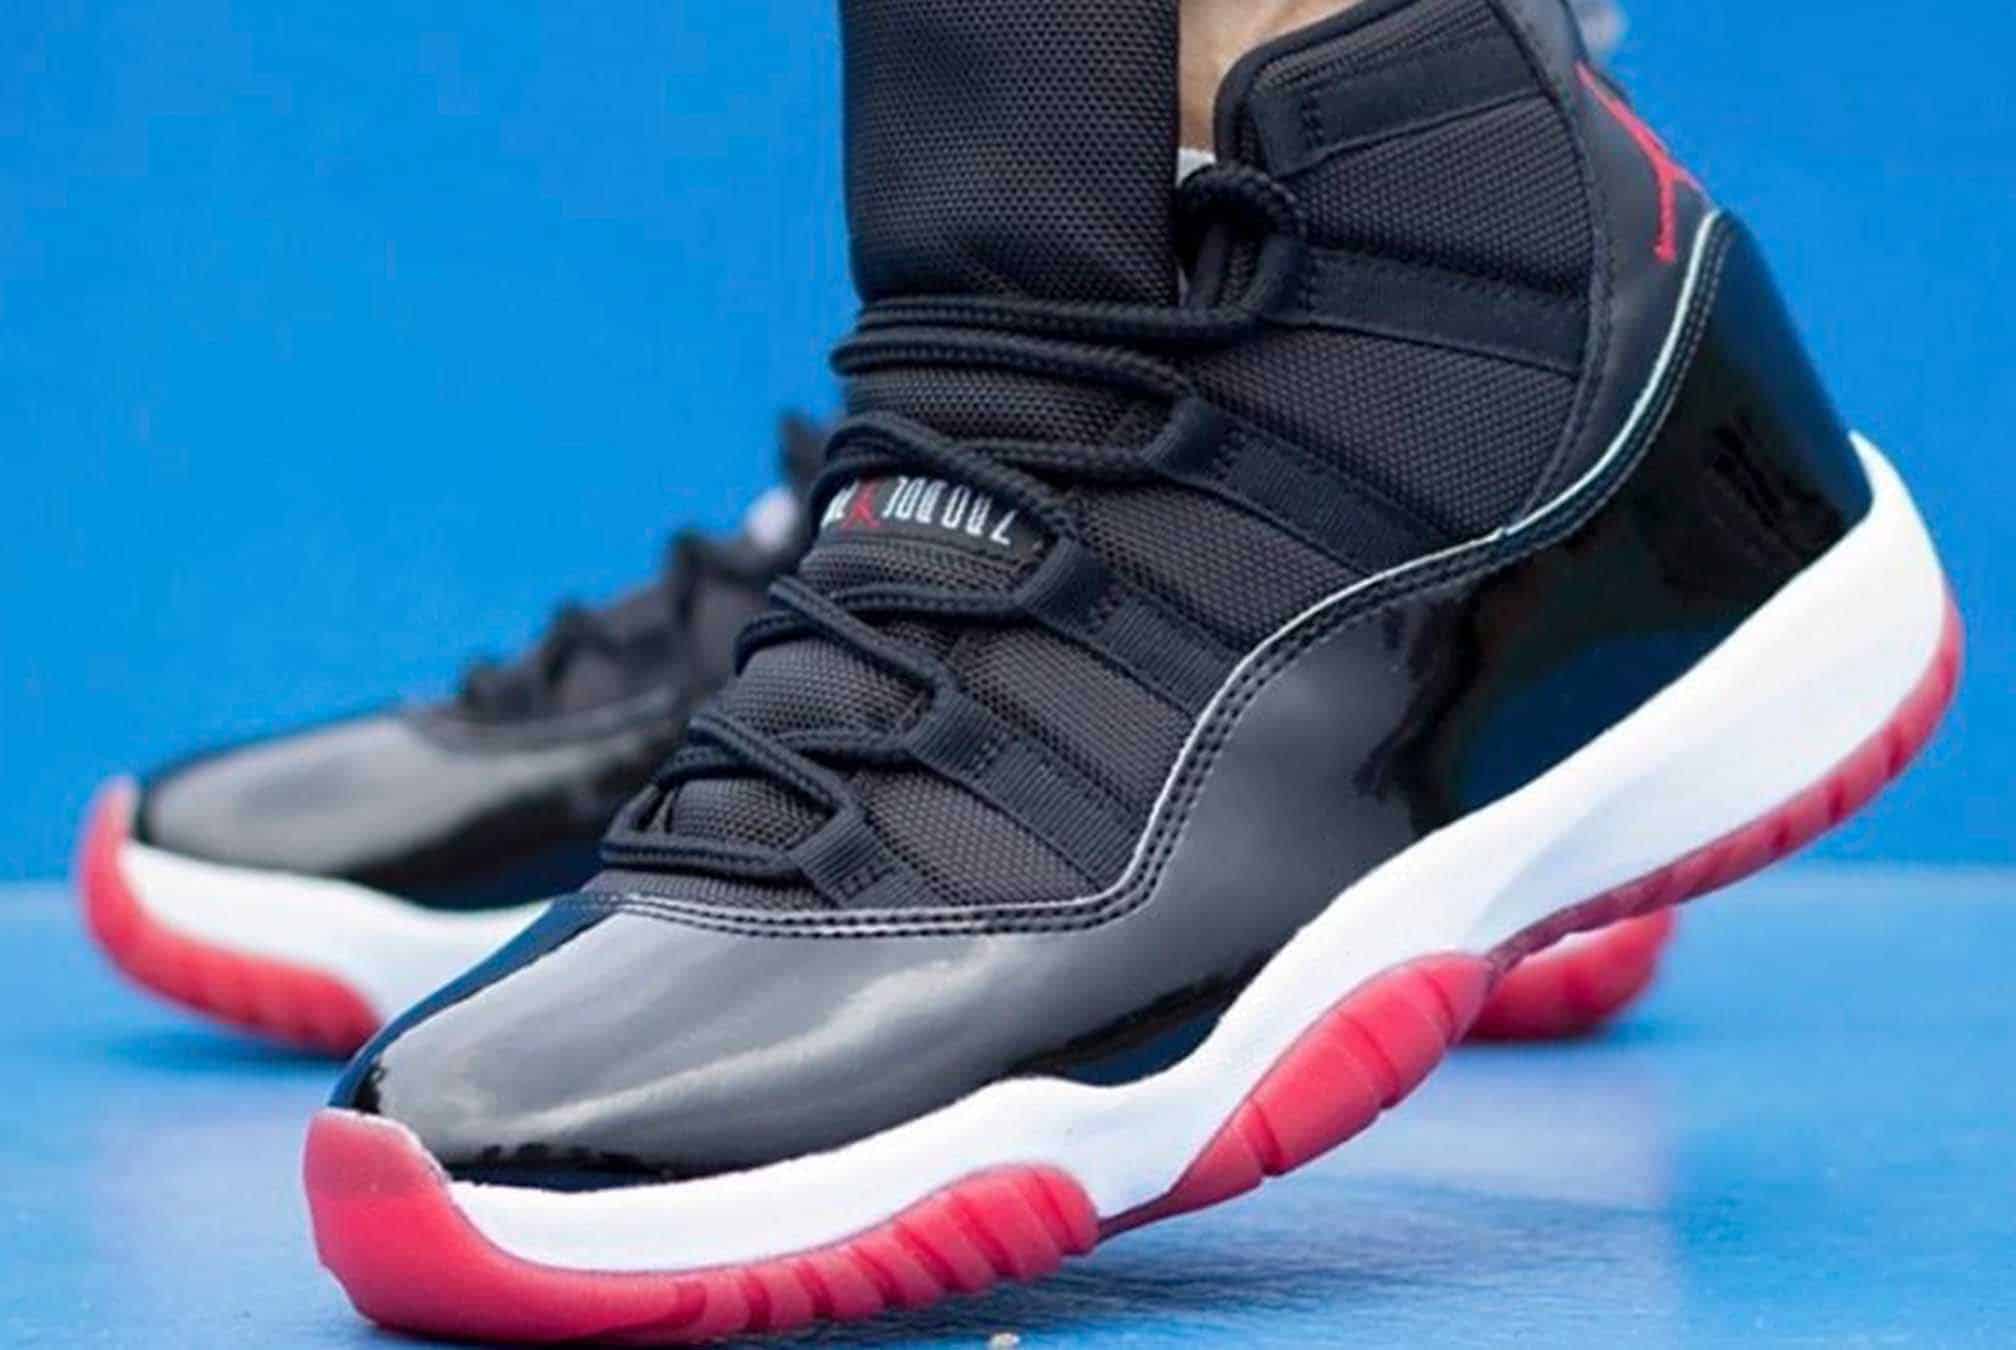 when are the jordan 11 breds coming out